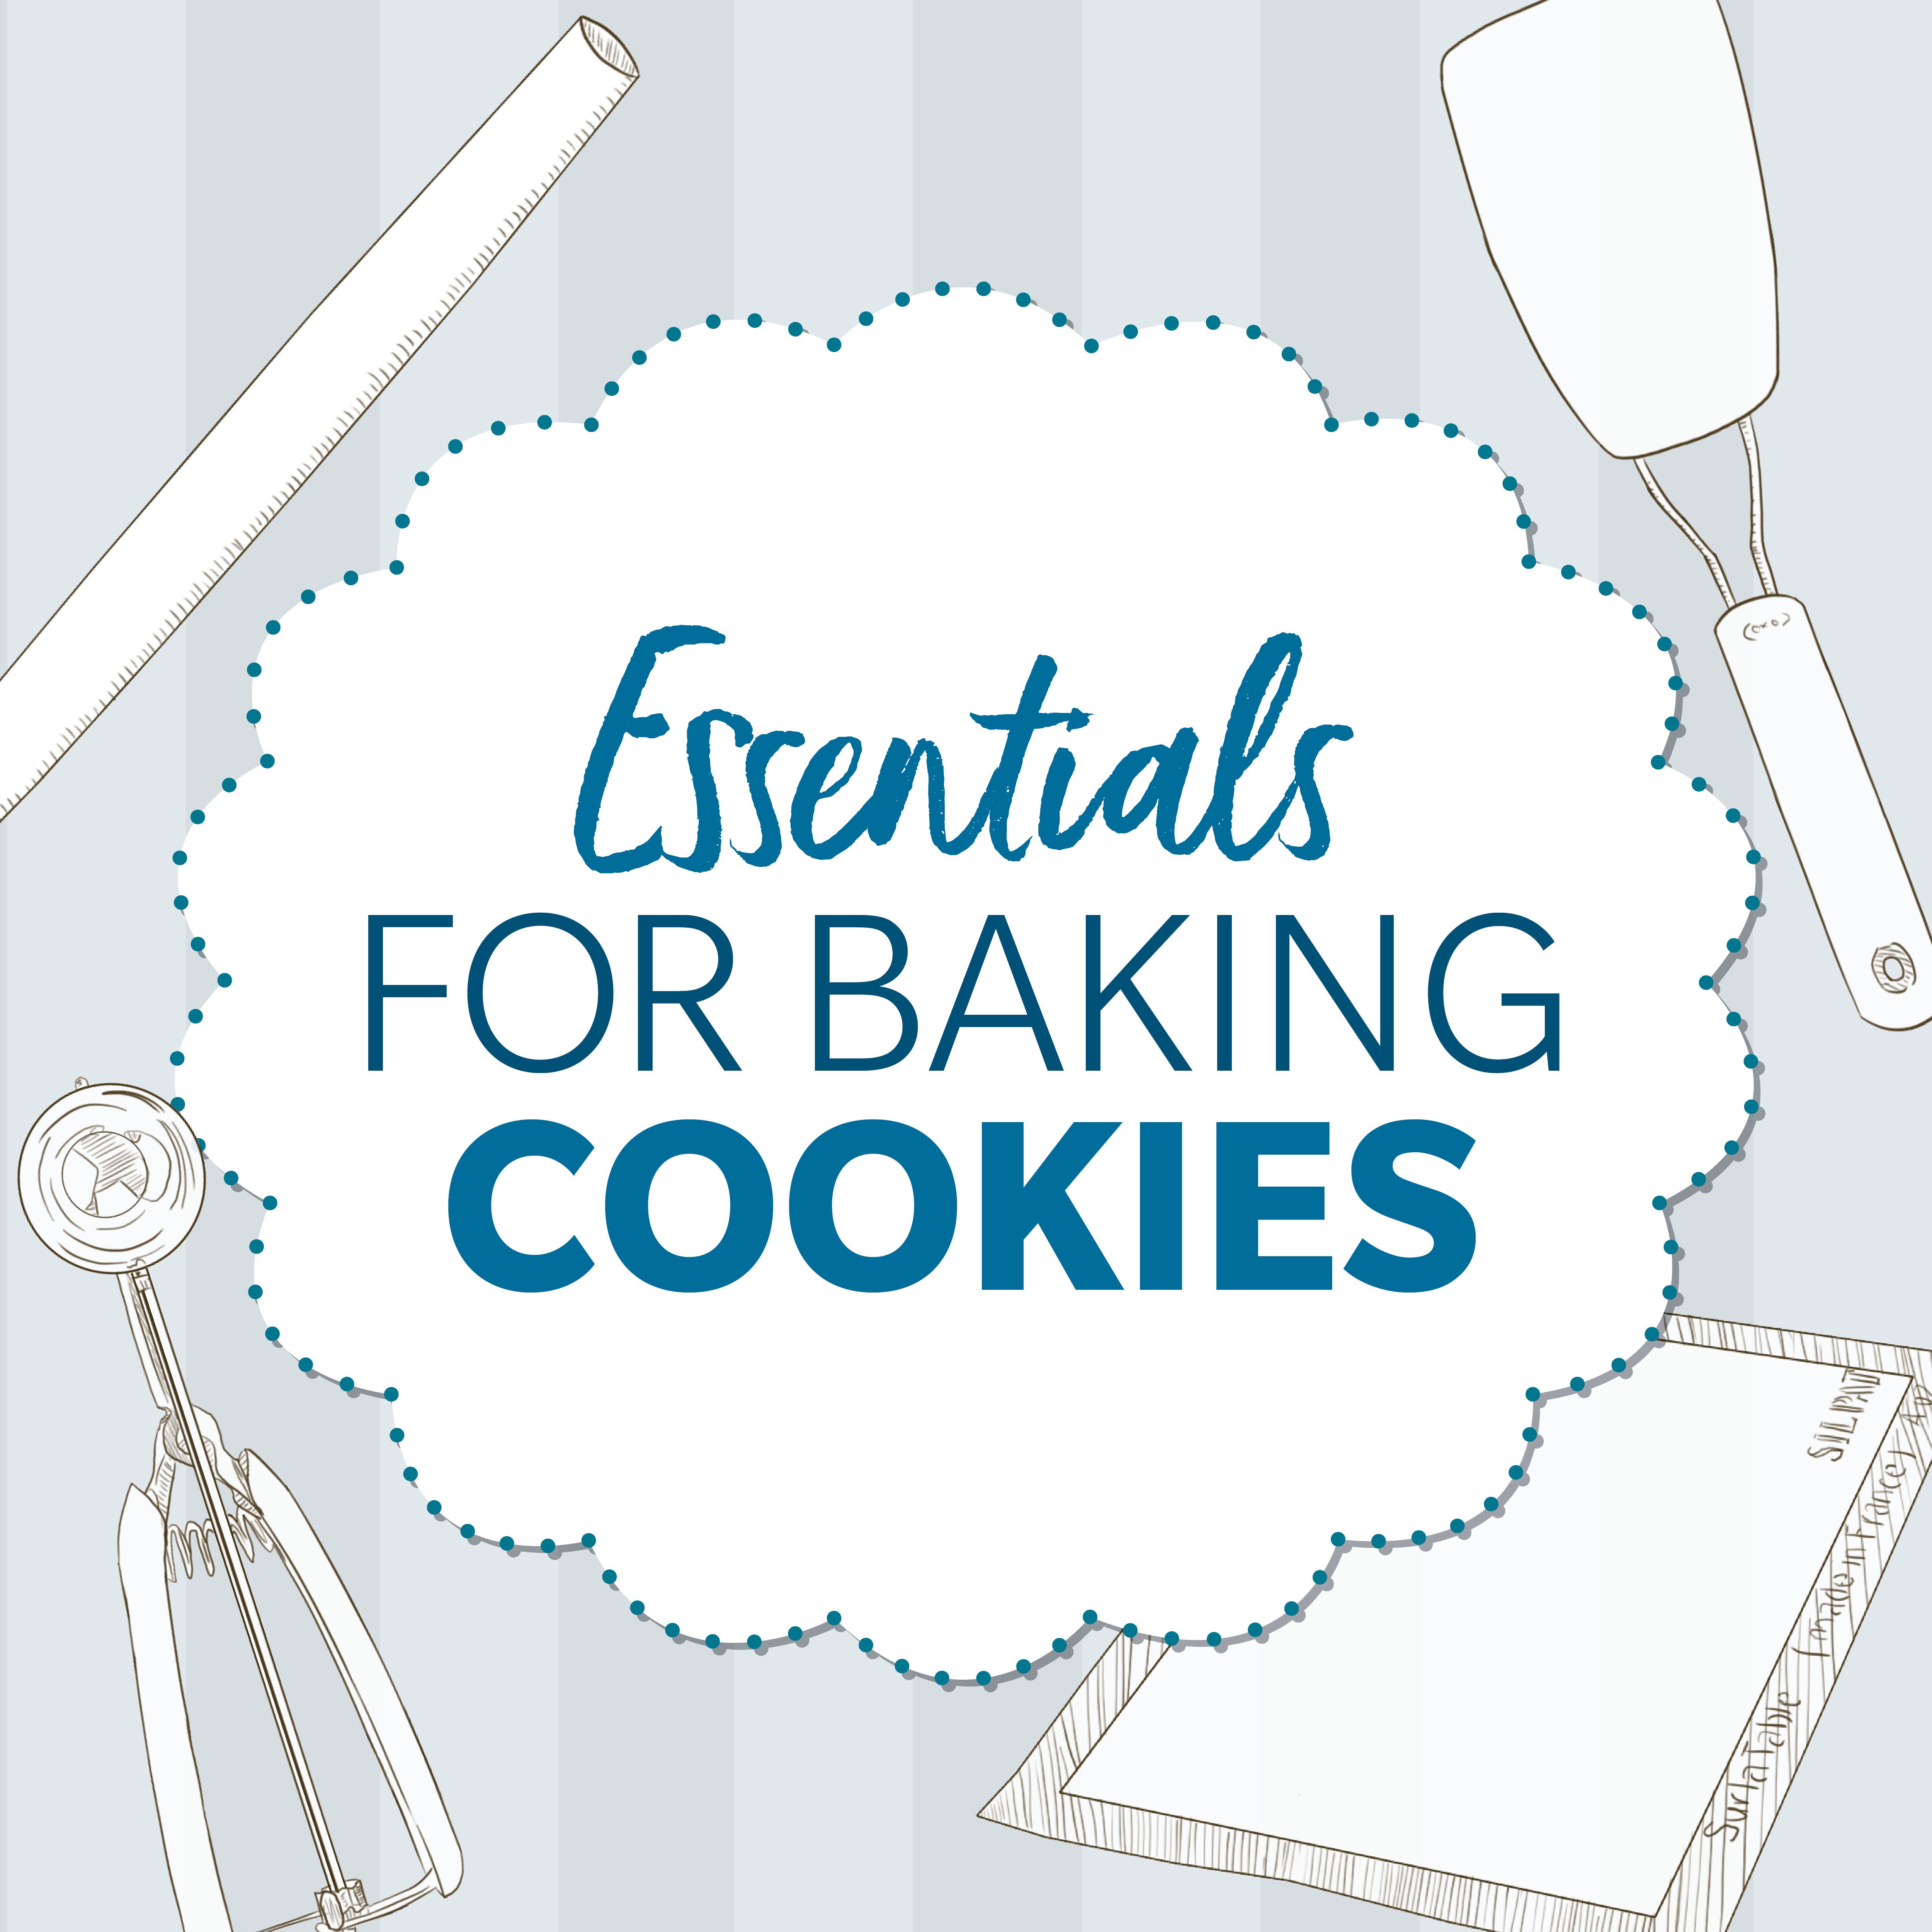 https://www.tasteofhome.com/wp-content/uploads/2019/07/6-Tools-You-Need-to-Make-Baking-Cookies-Easier.jpg?fit=700%2C700